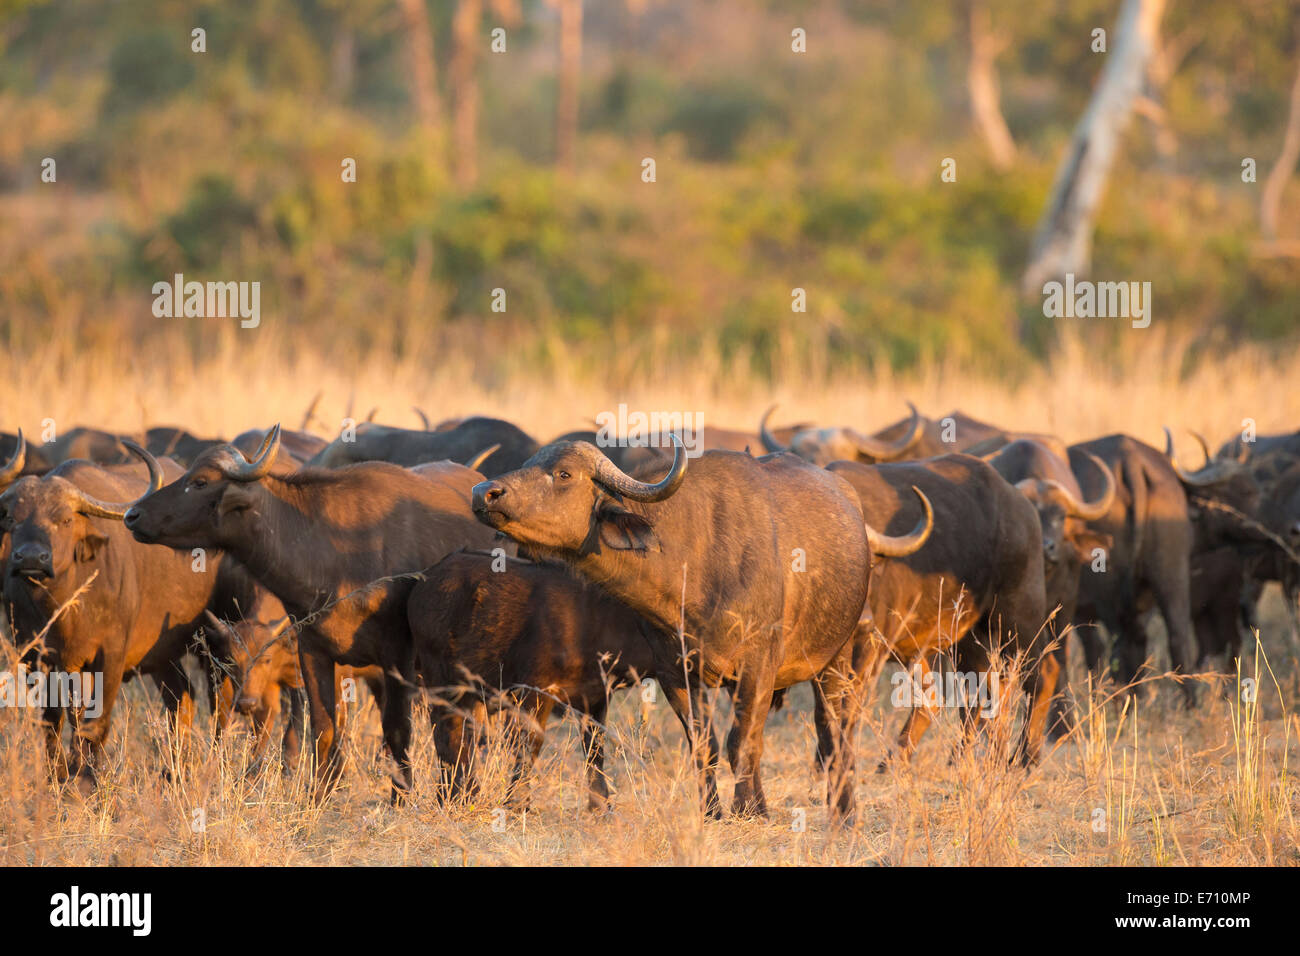 African Buffalo (Syncerus caffer) in movimento Foto Stock